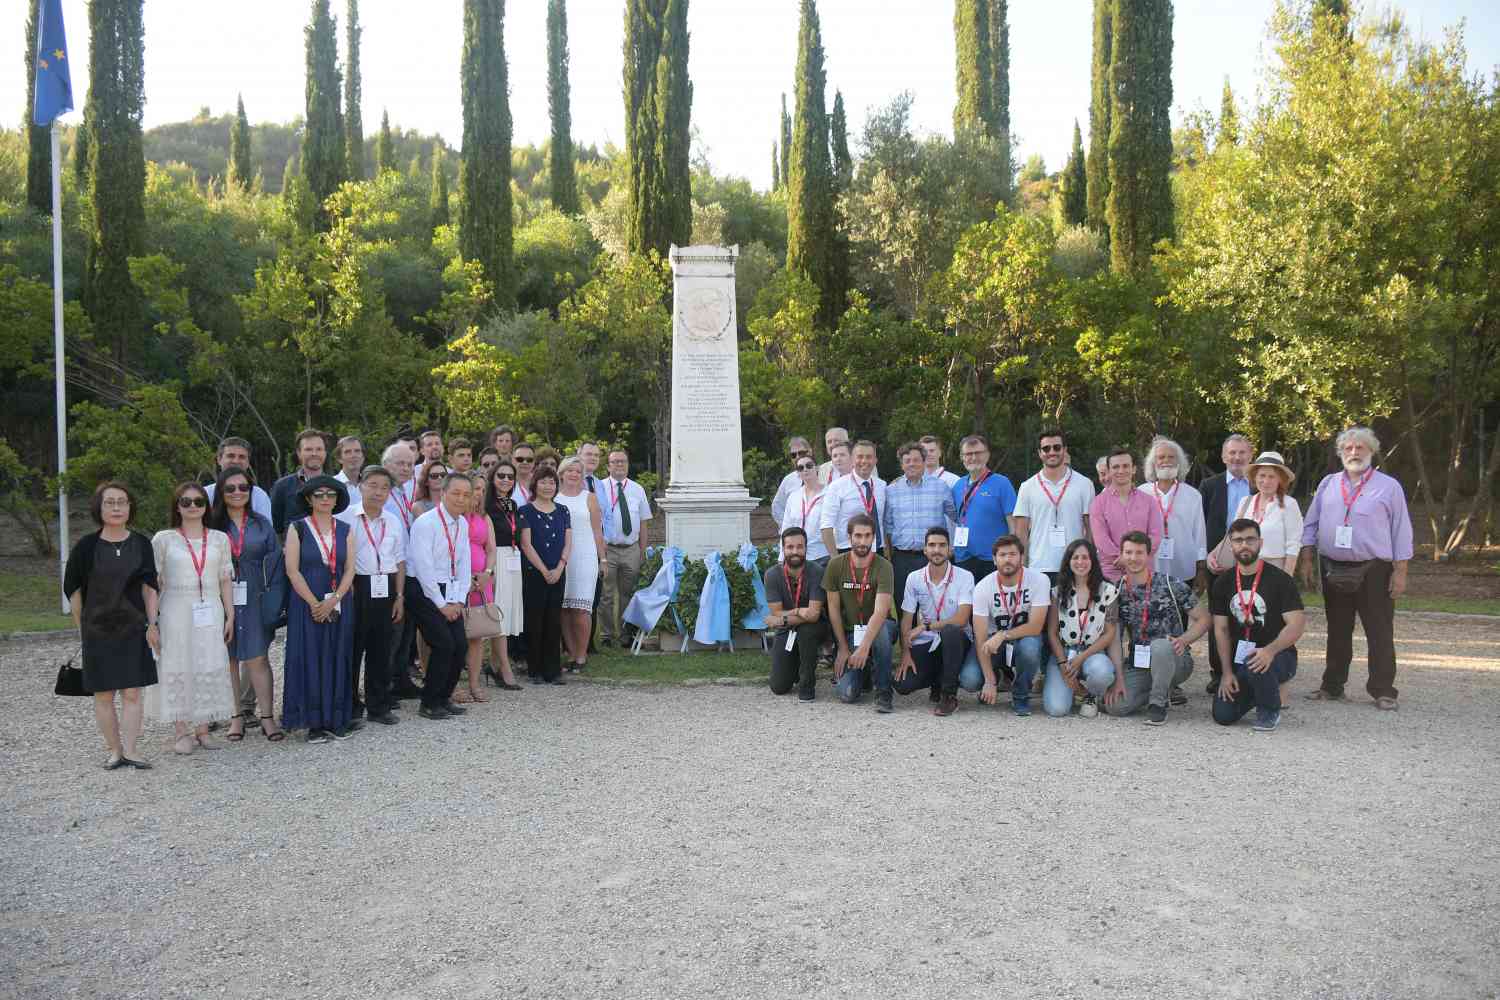 Ancient Olympia, June 2019 - At the grave of Coubertin's heart, with a distinguished group of anti-doping researchers and stakeholders